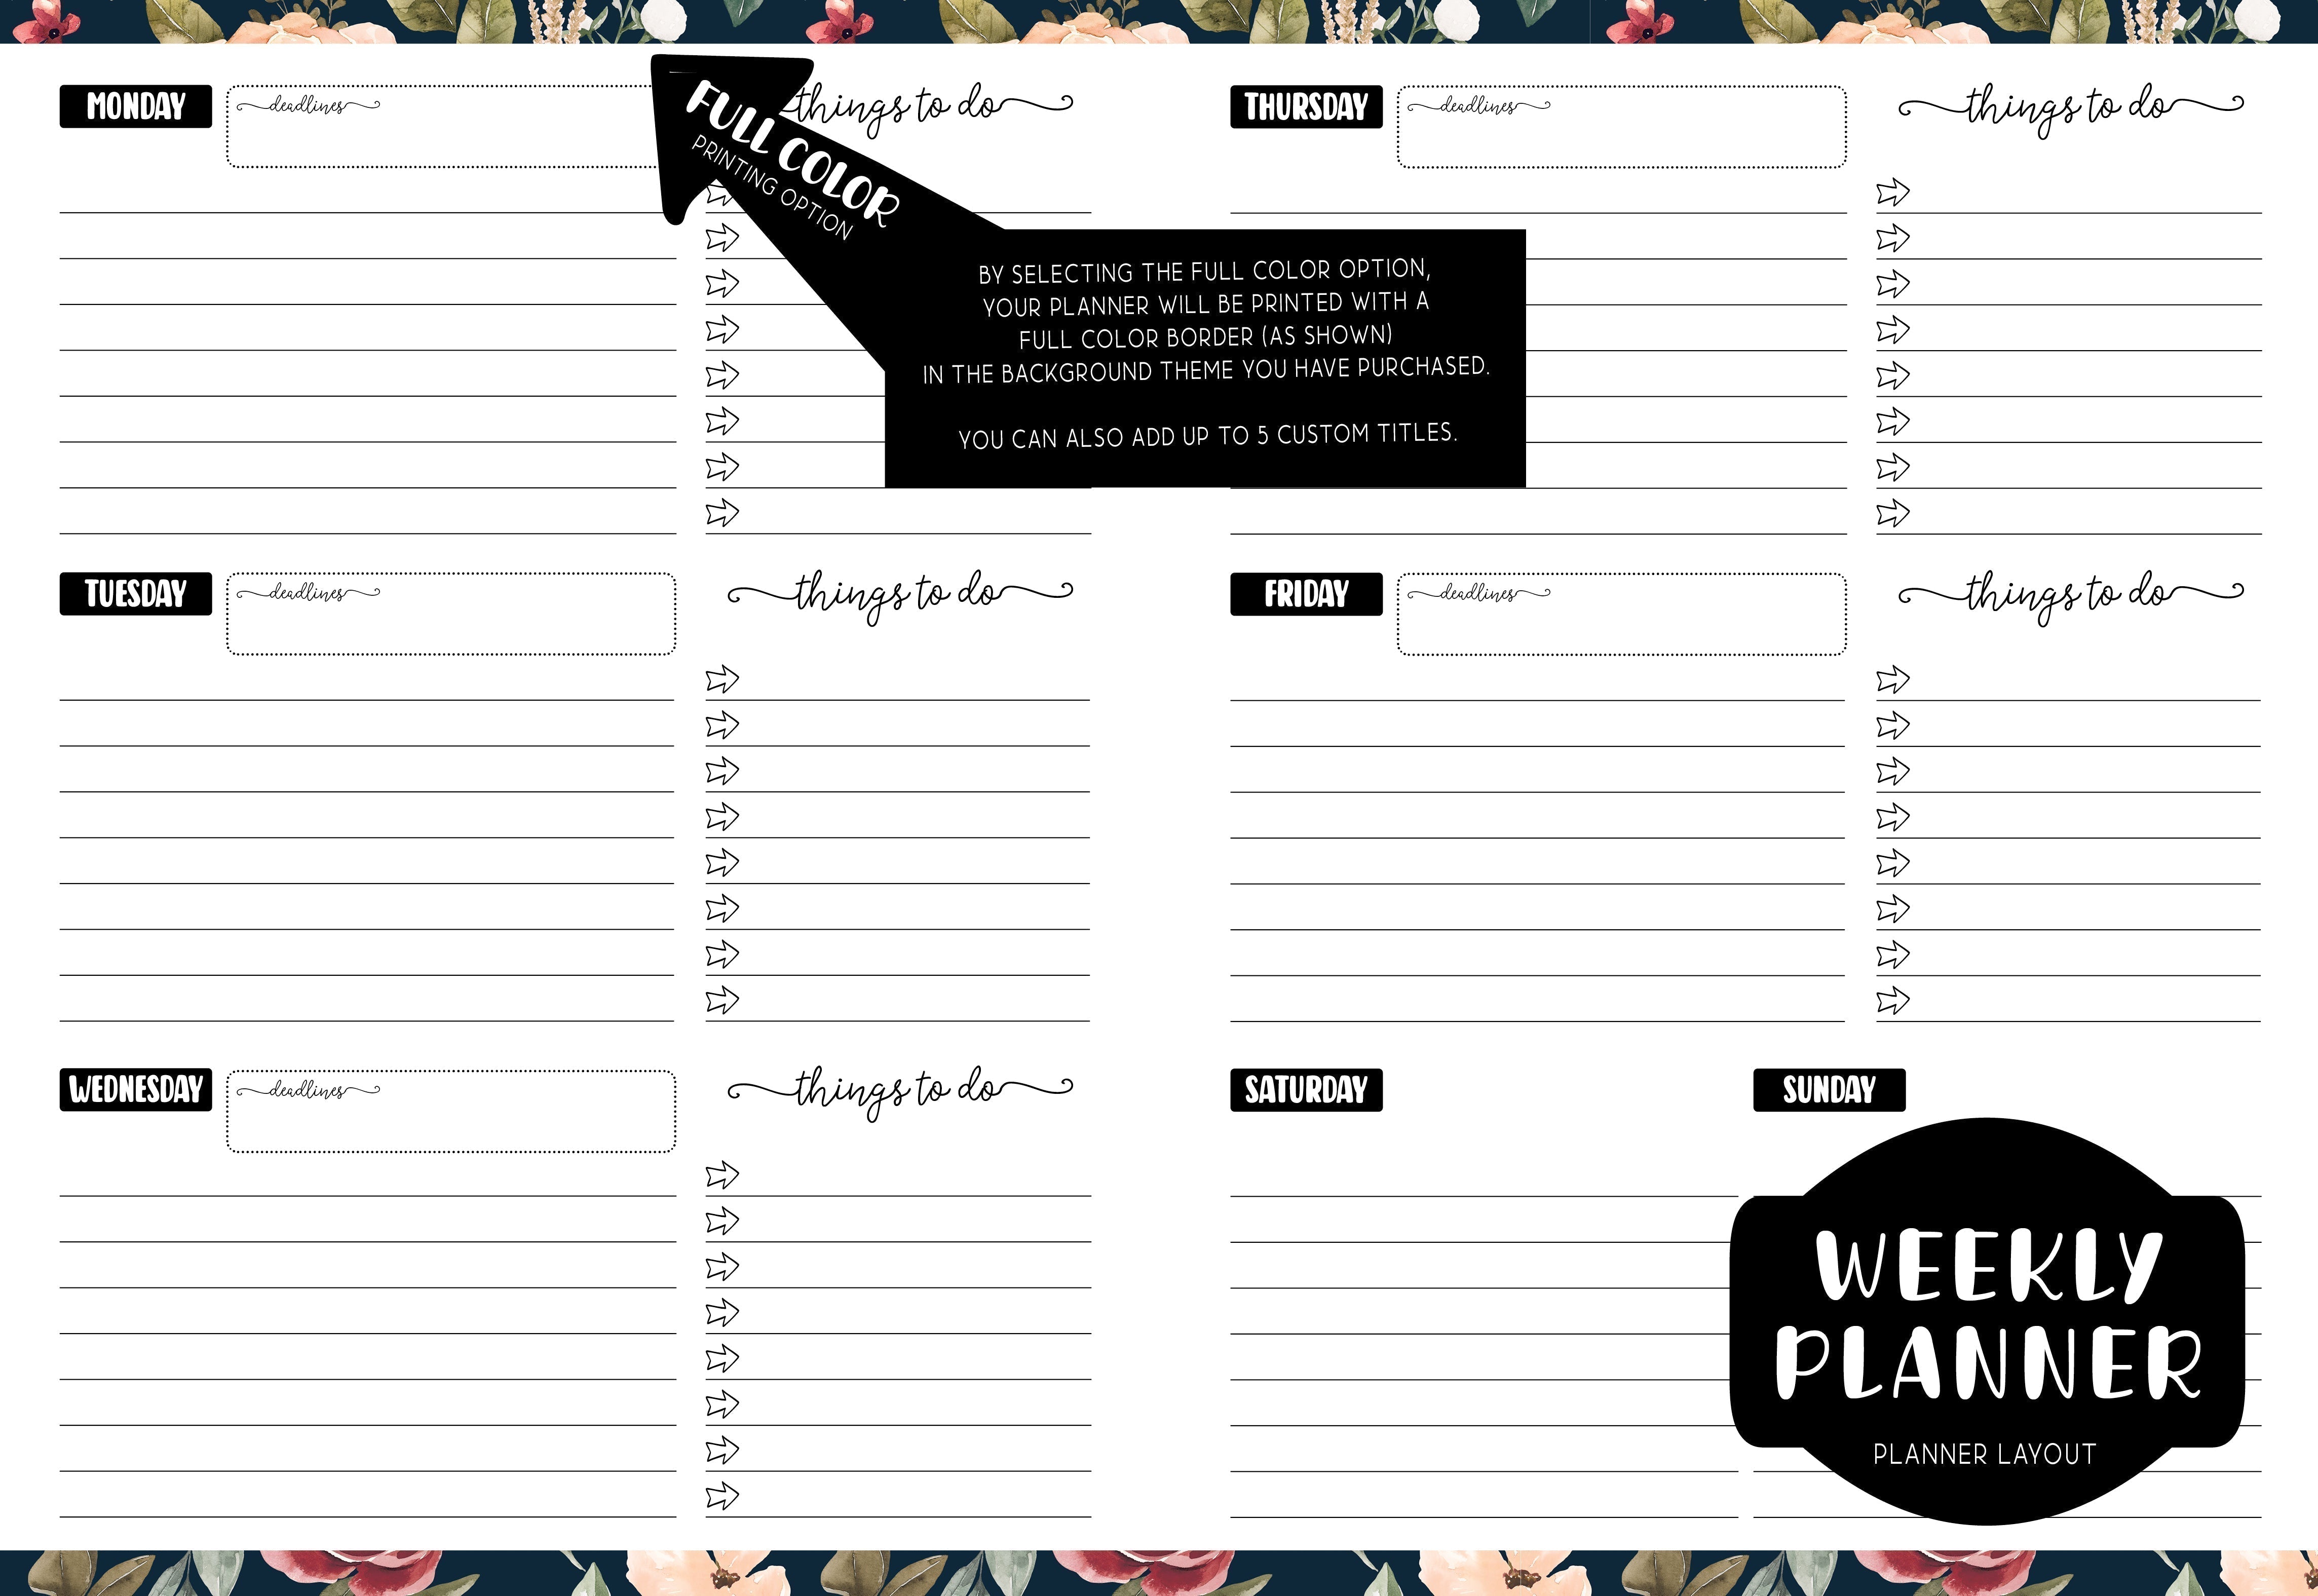 Weekly Planner - BW STRIPED FLORAL